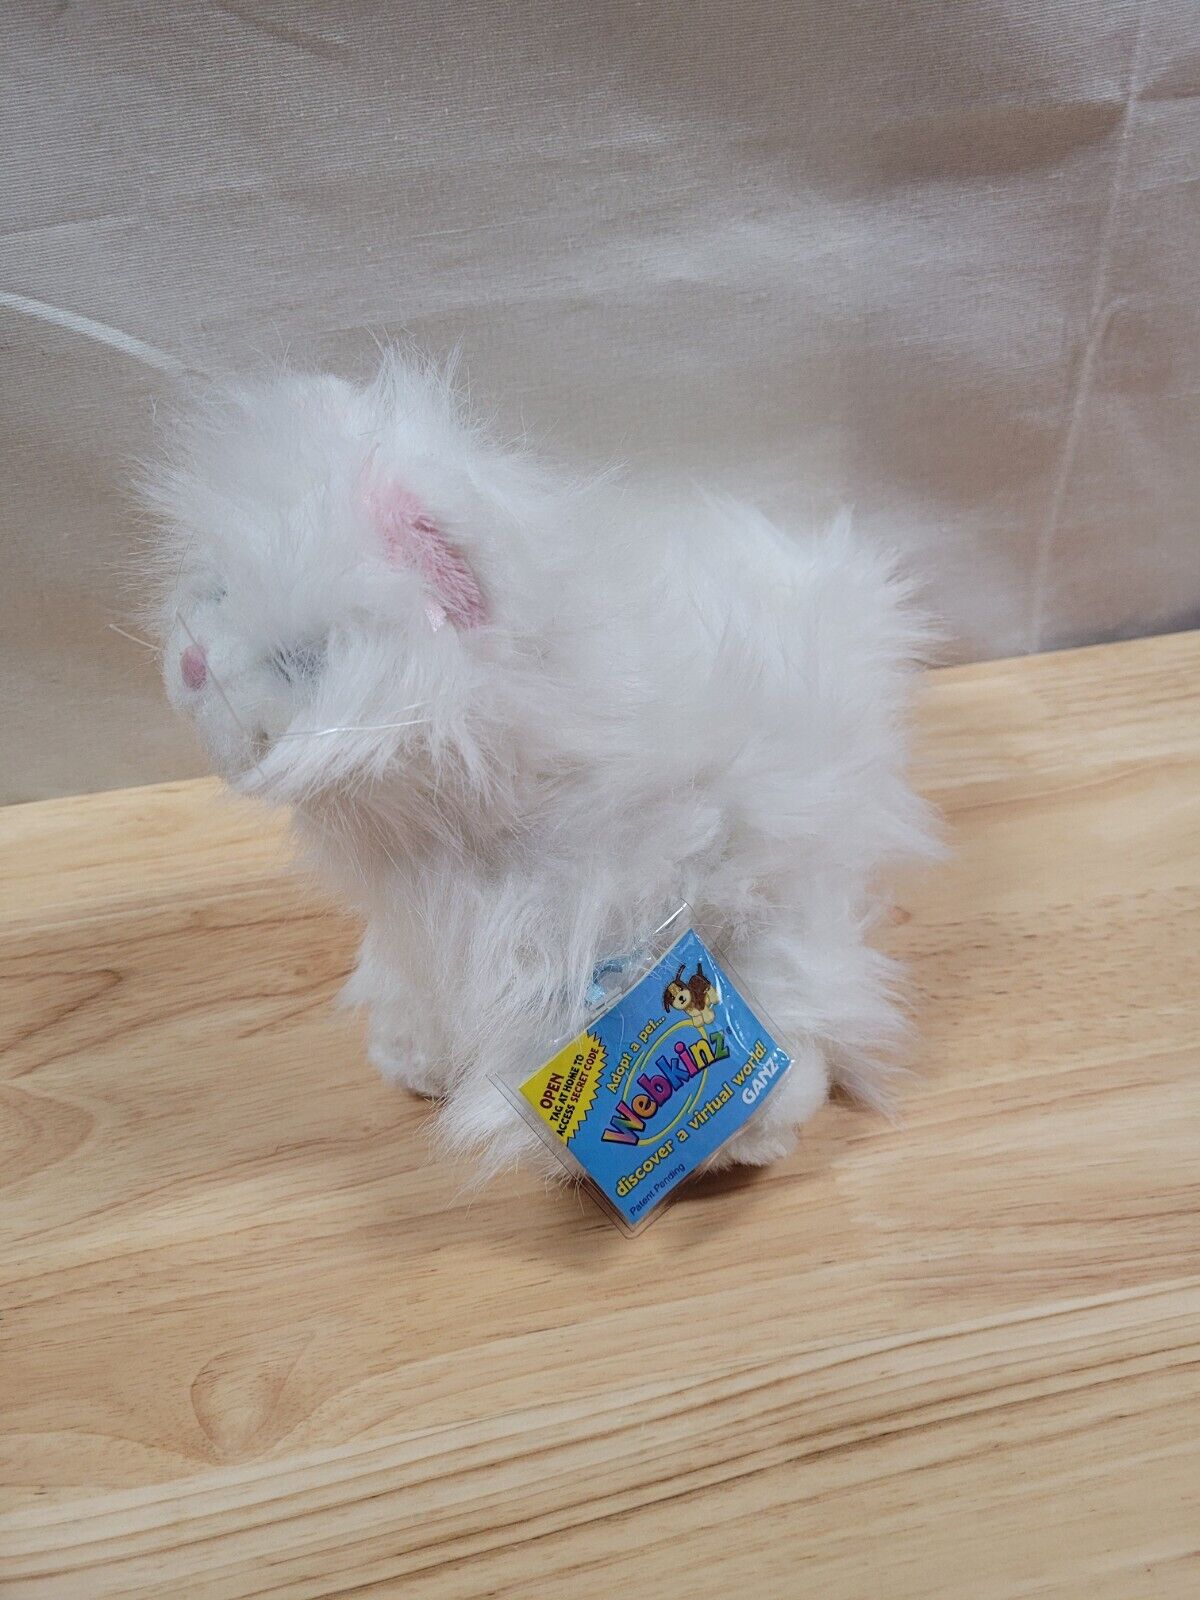 Webkinz Persian Cat Plush With Code Tags Sealed Kinz Doll Sealed New White Pink Webkinz